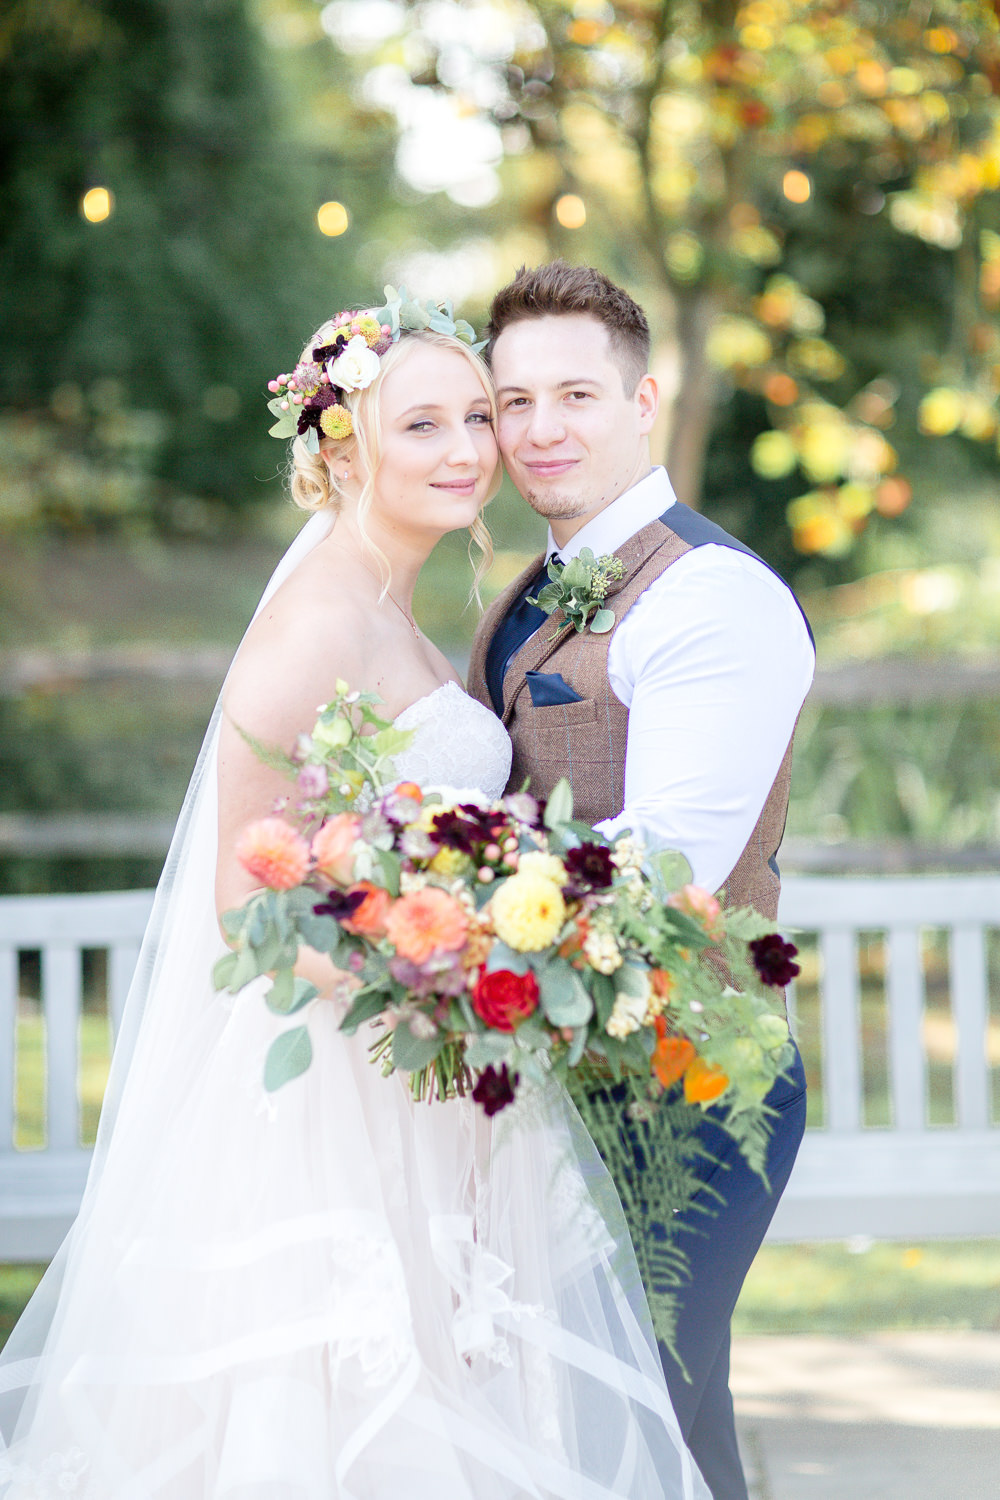 Whimsical Autumnal Boho Wedding with an Incredible Hanging Flower Installation